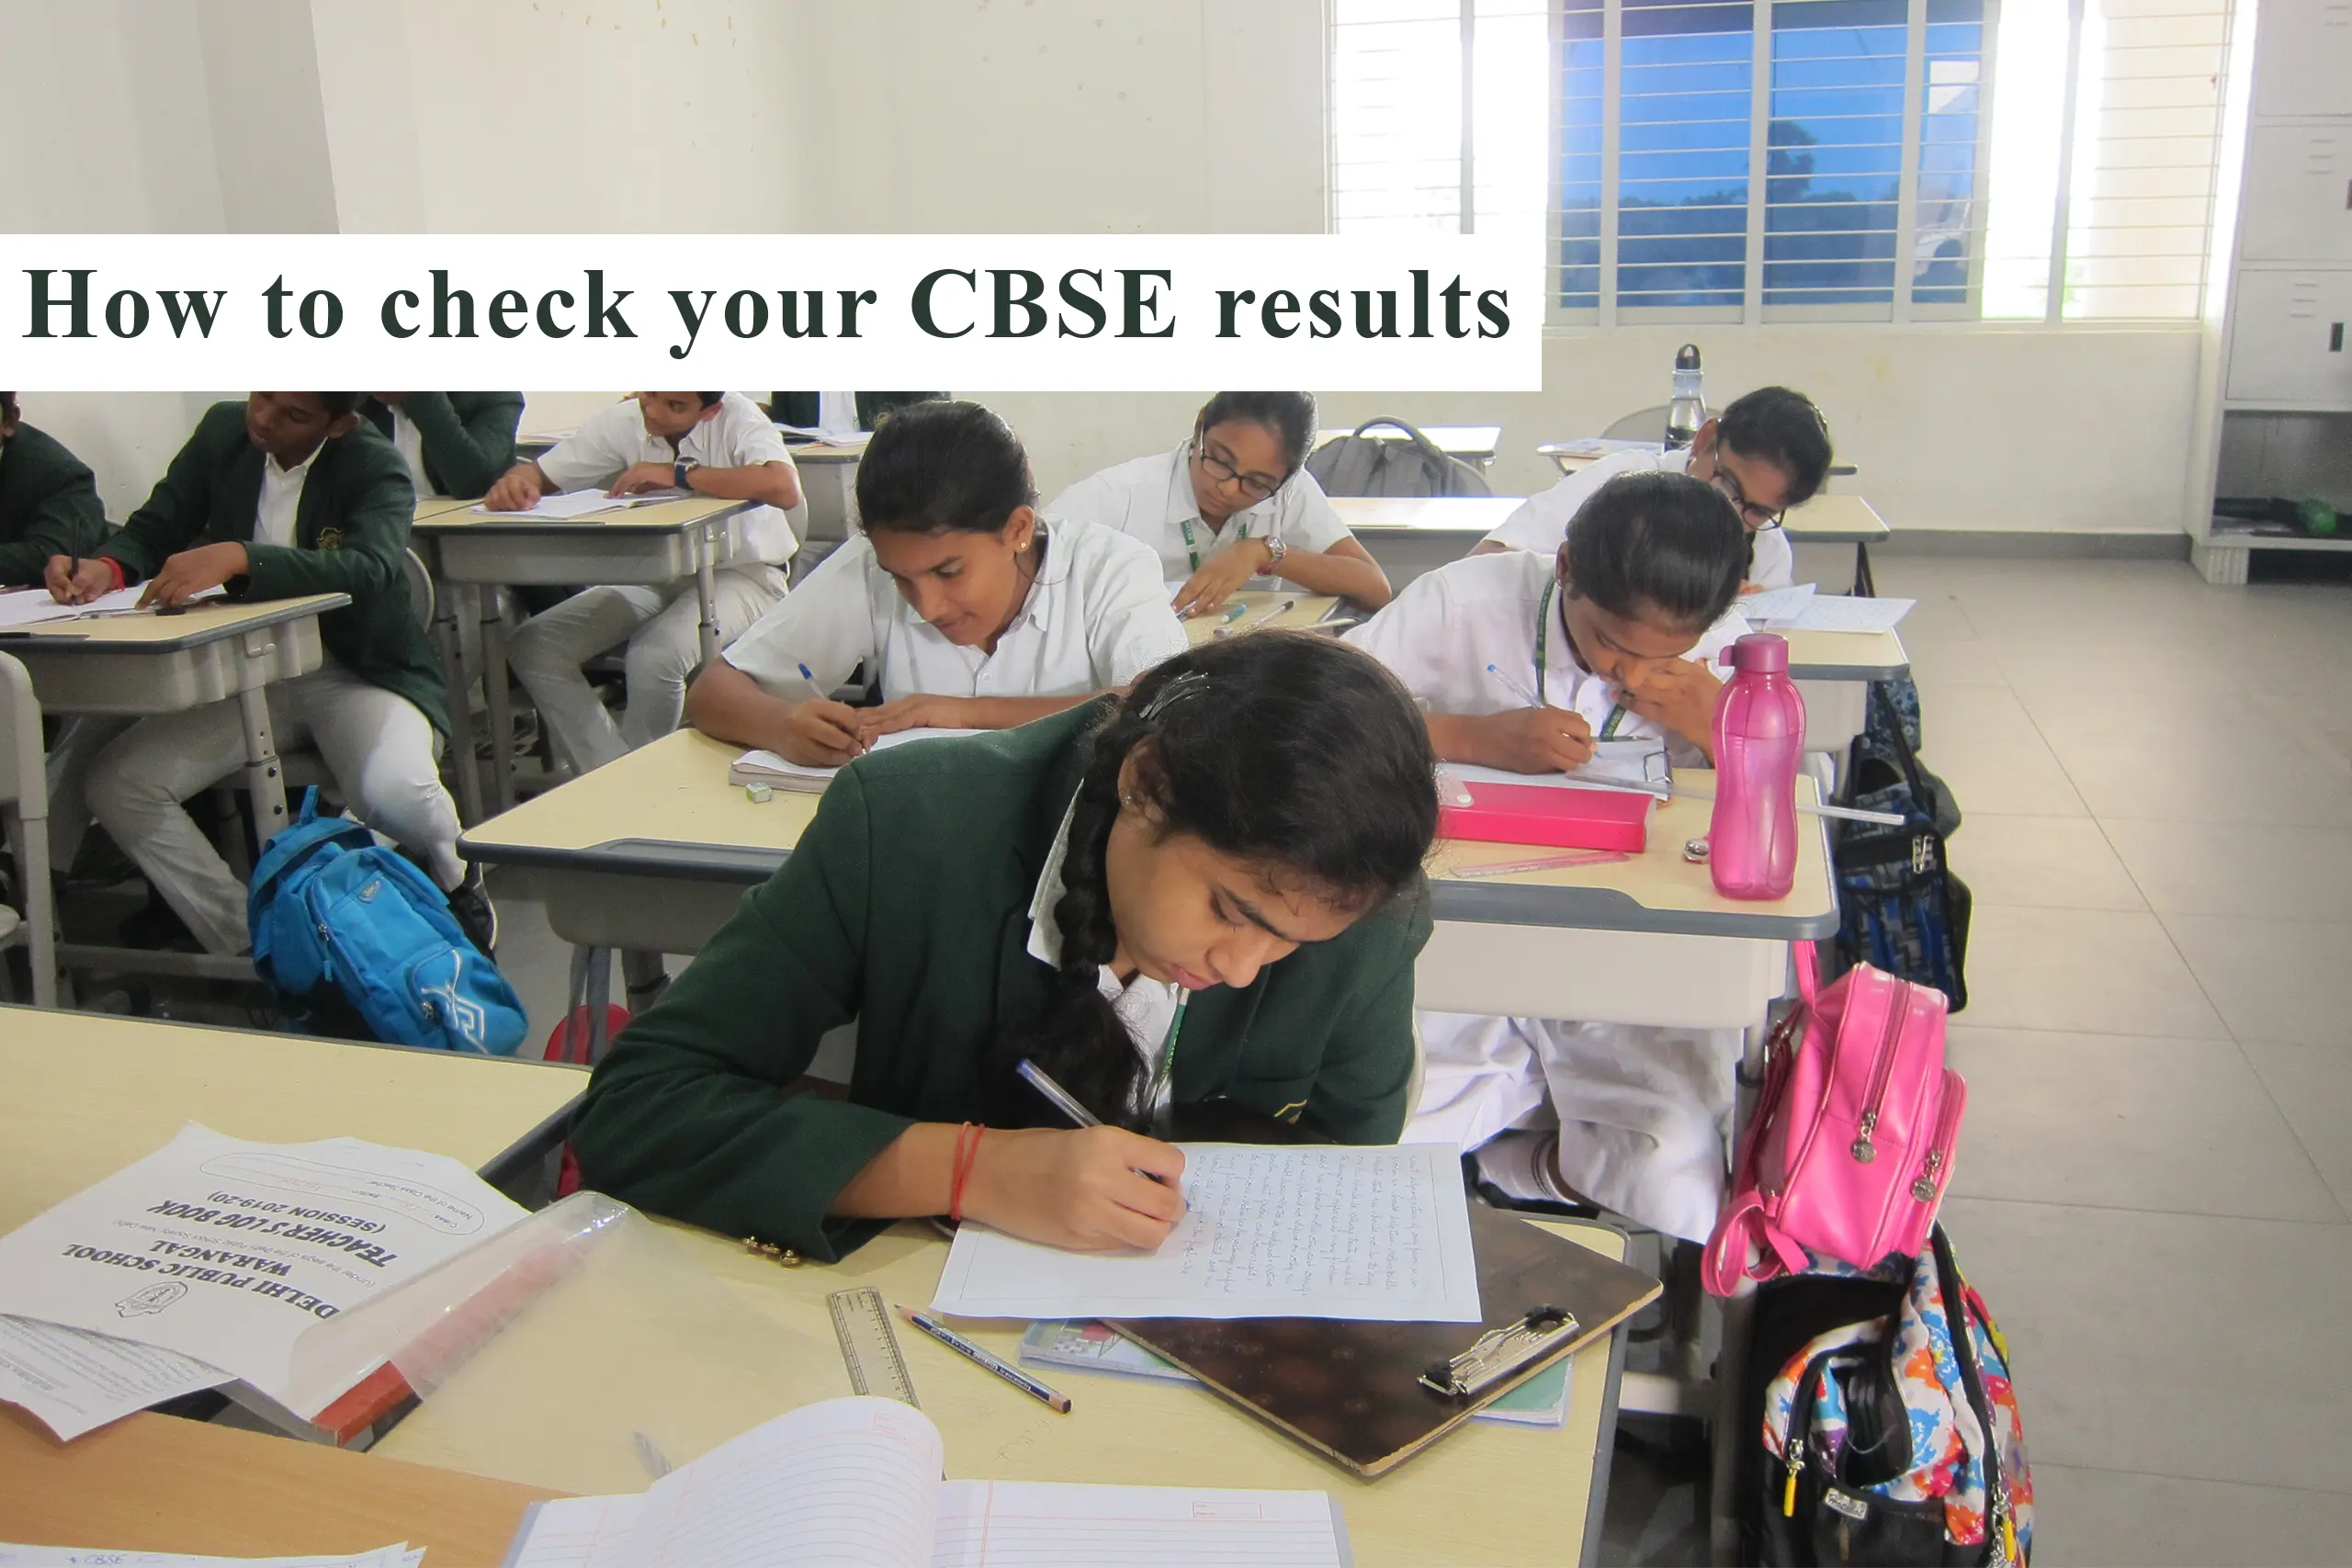 The image captures the focused atmosphere of students writing exams, accompanied by the text 'How to check your CBSE results' at the top.